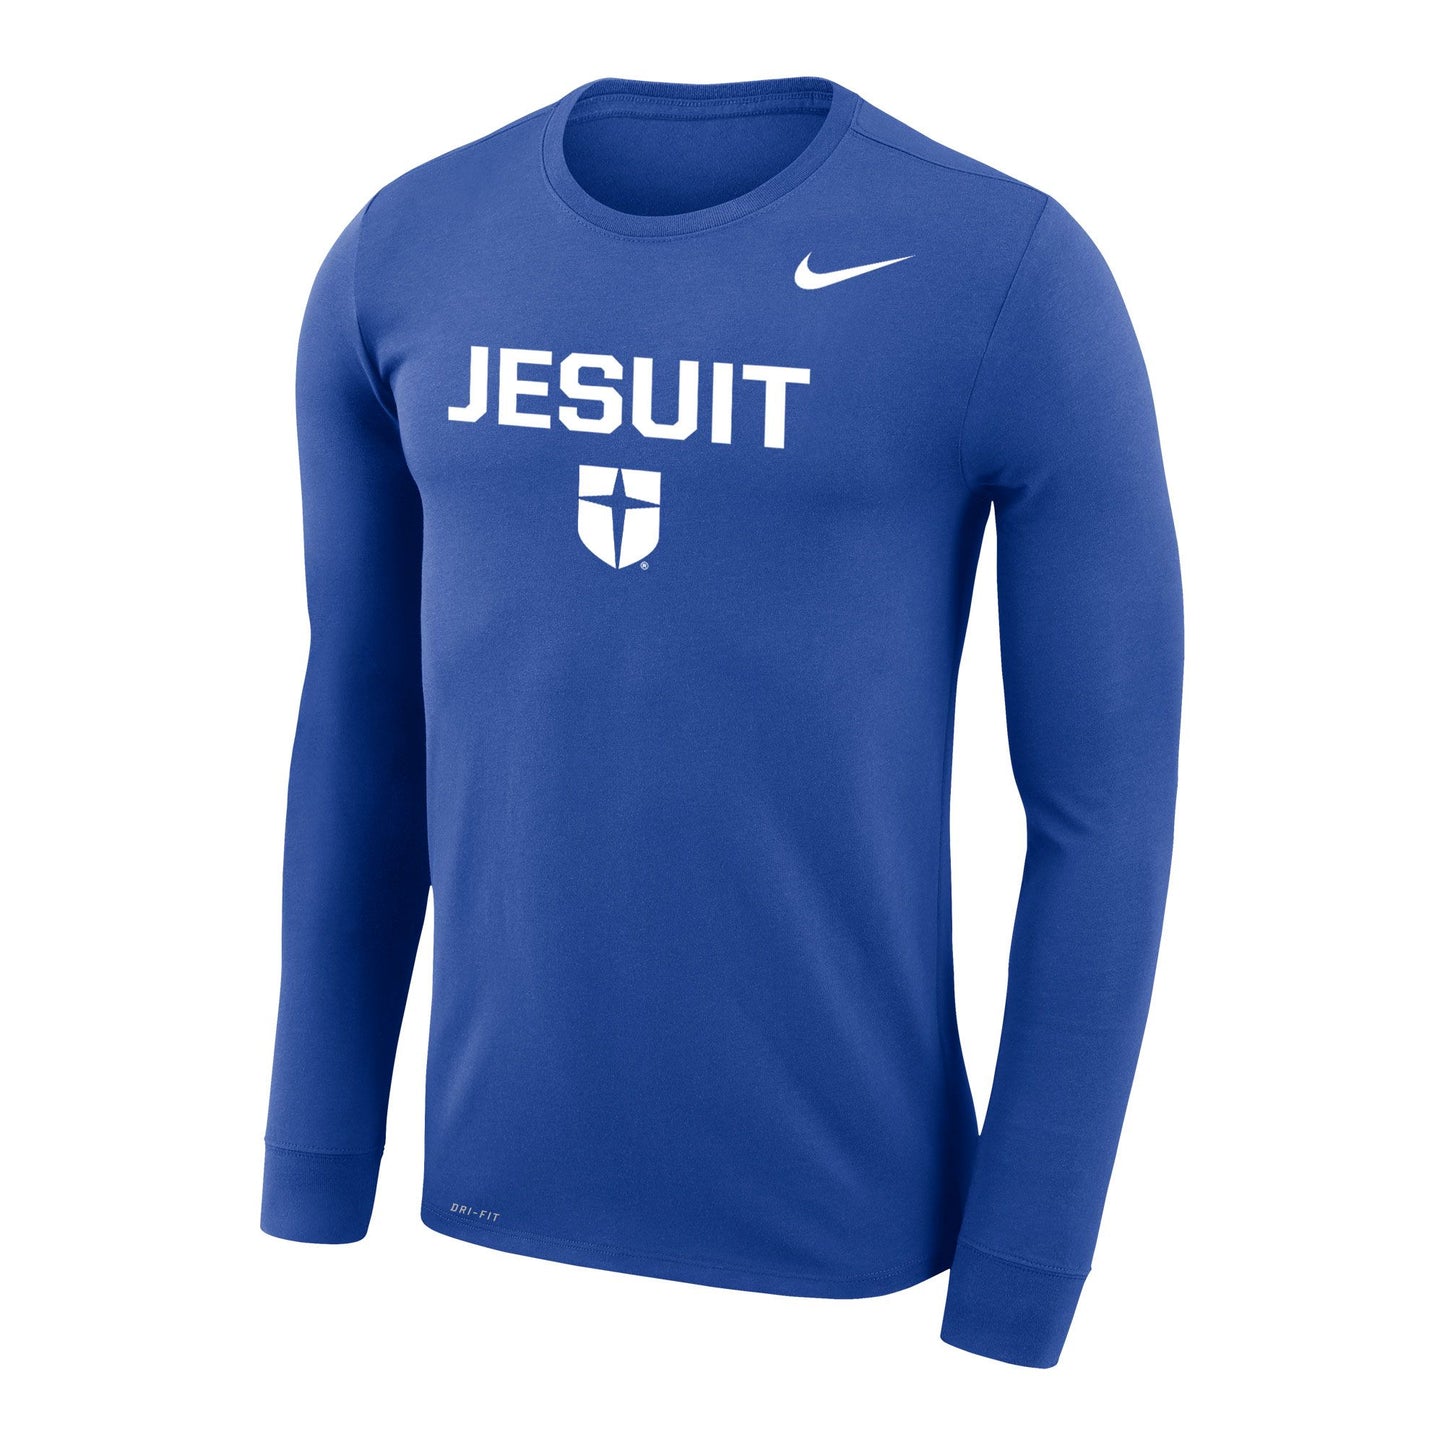 Nike Jesuit dri-fit legend Long Sleeve in Game Day Royal